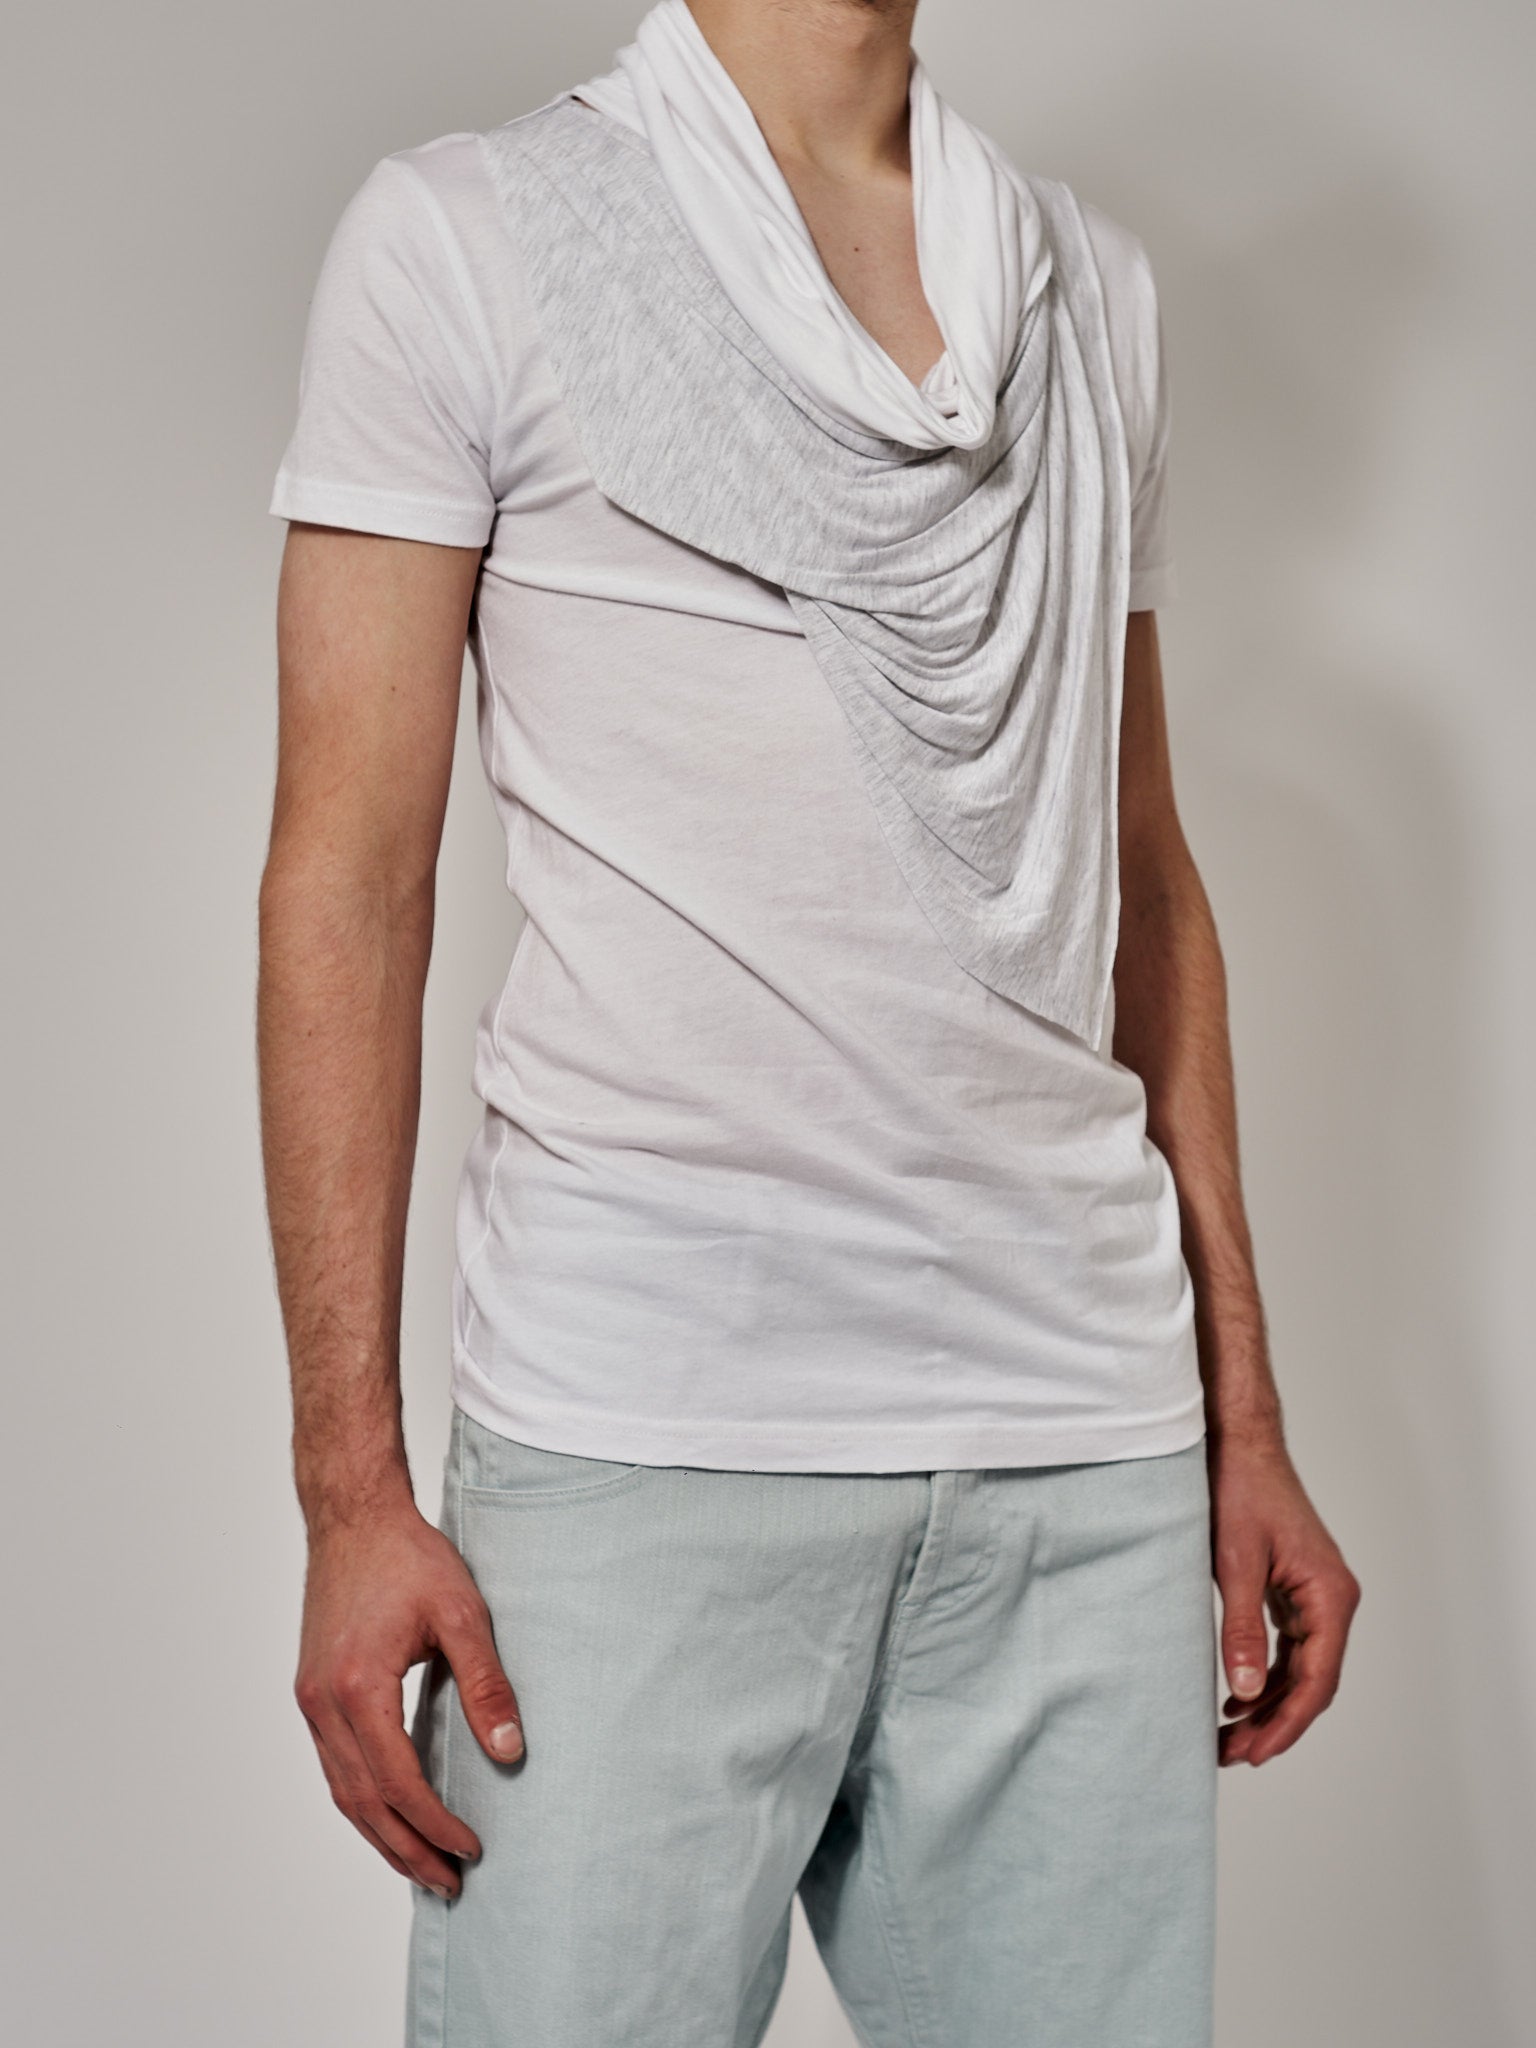 White And Light Grey Swoop Layered T-Shirt